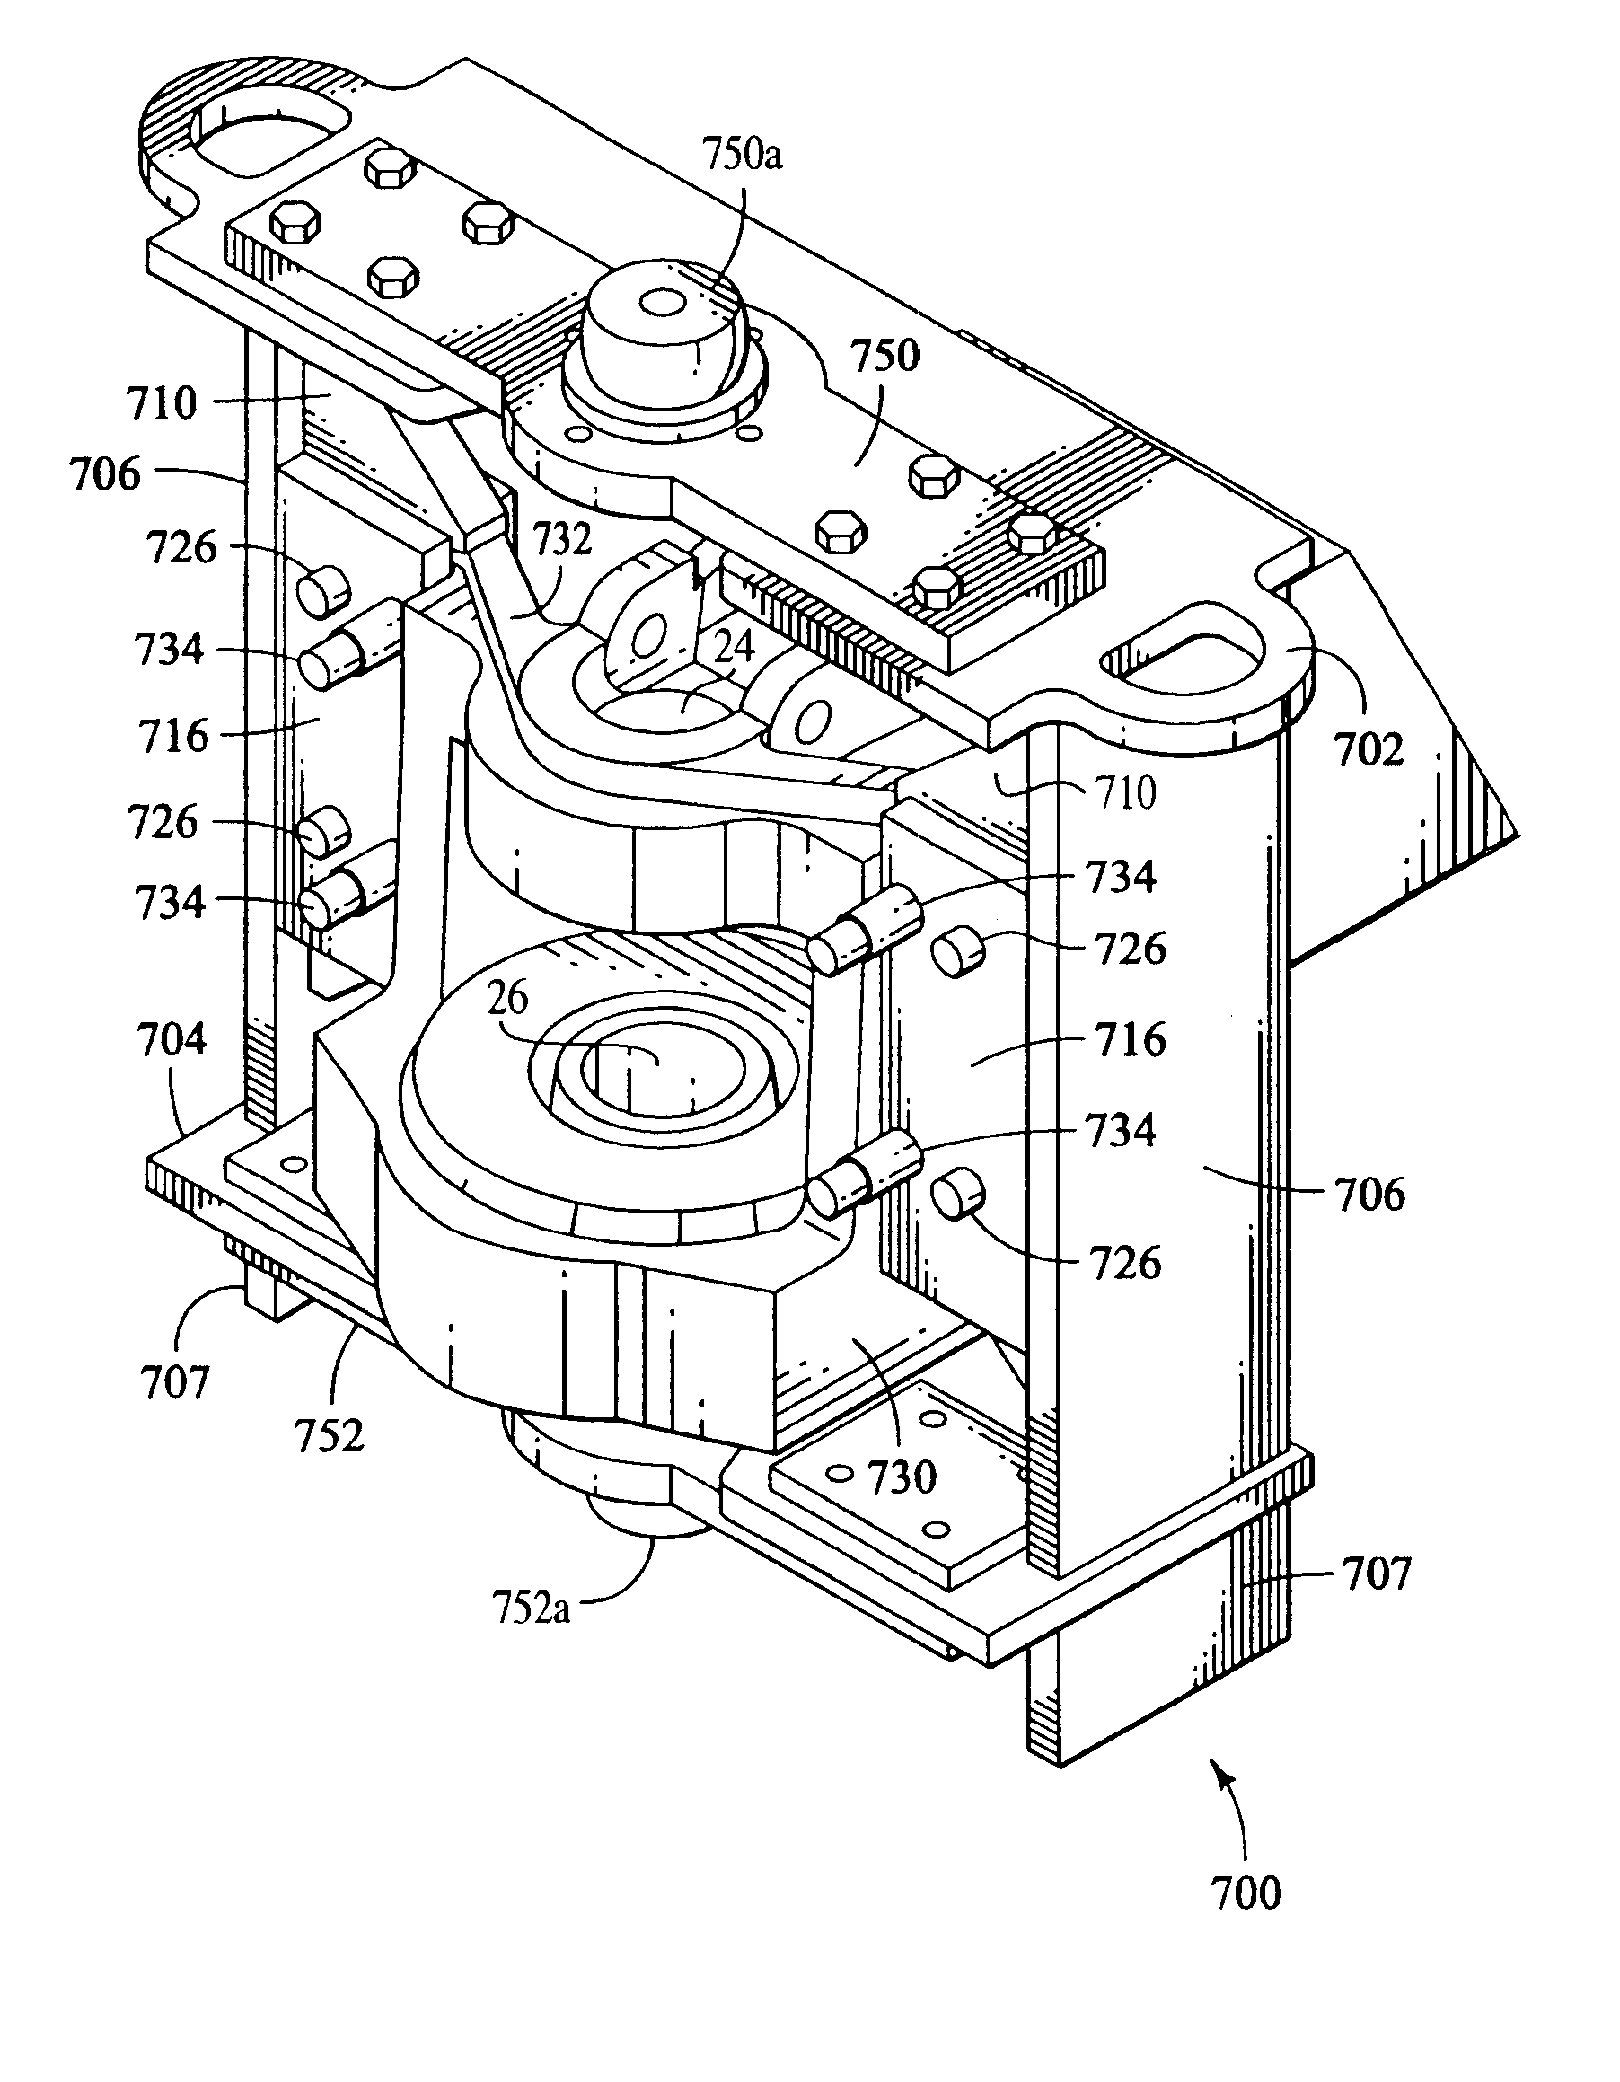 Articulated connector reconditioning process and apparatuses